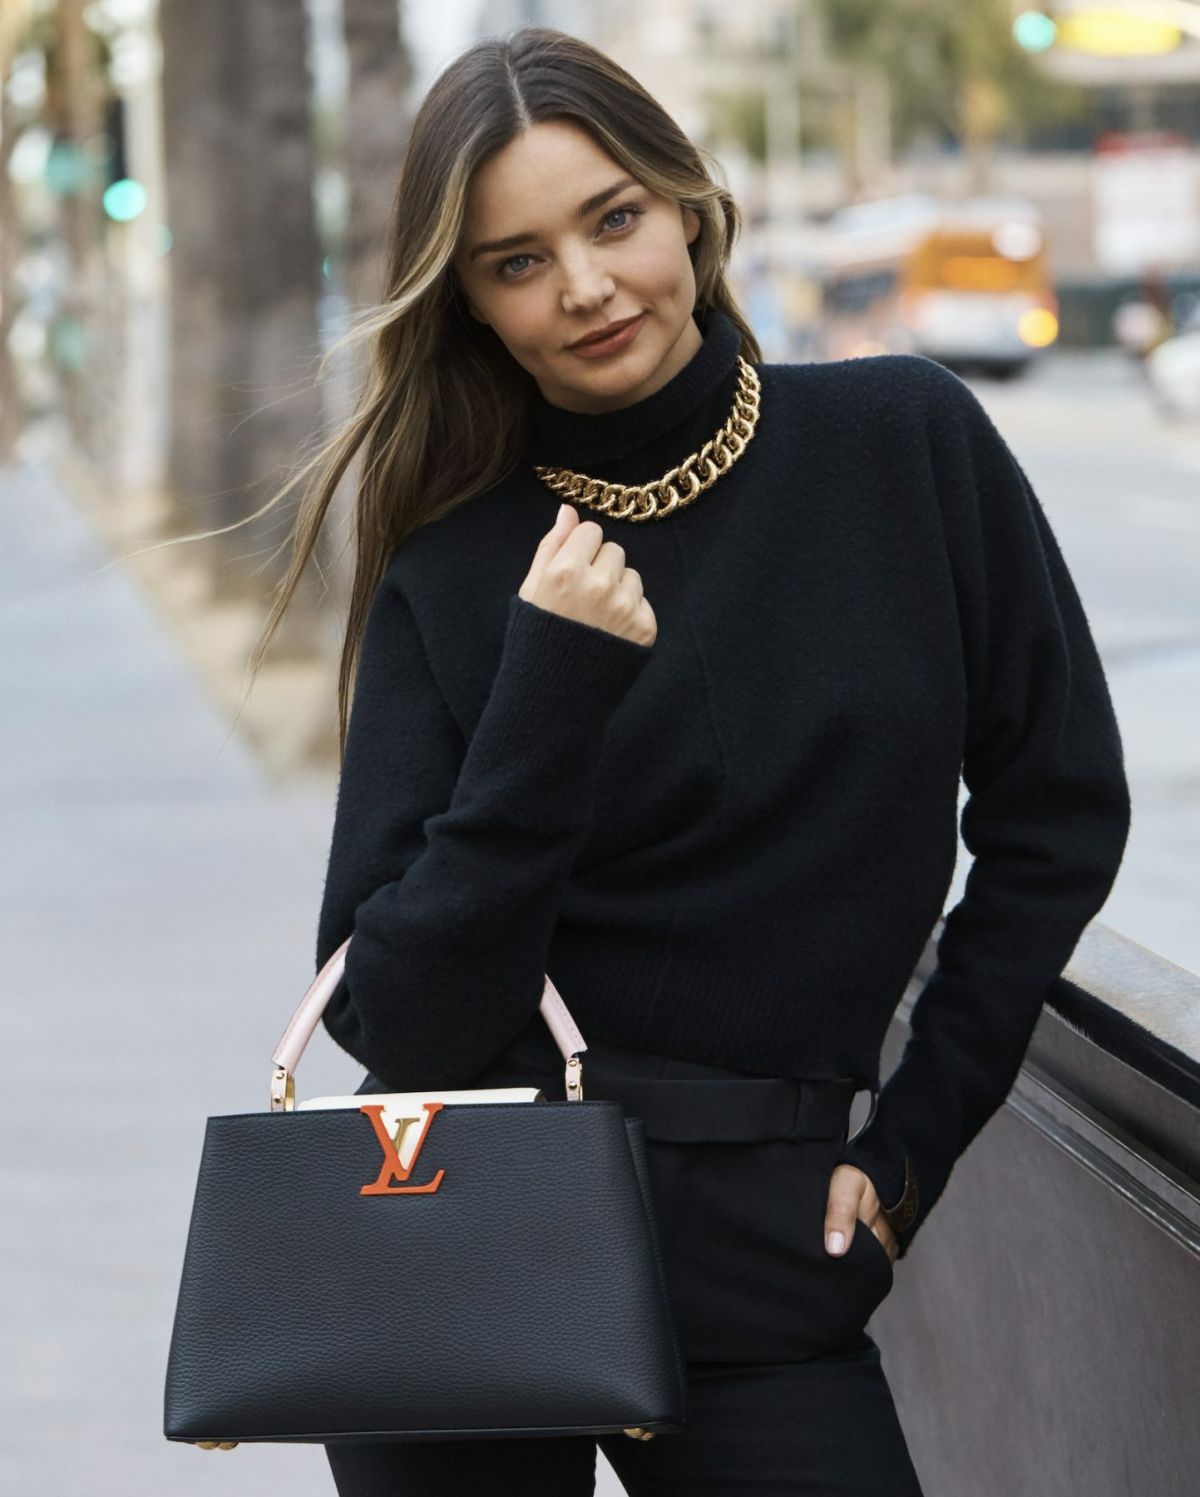 Miranda Kerr And the Louis Vuitton Capucines – Star Style